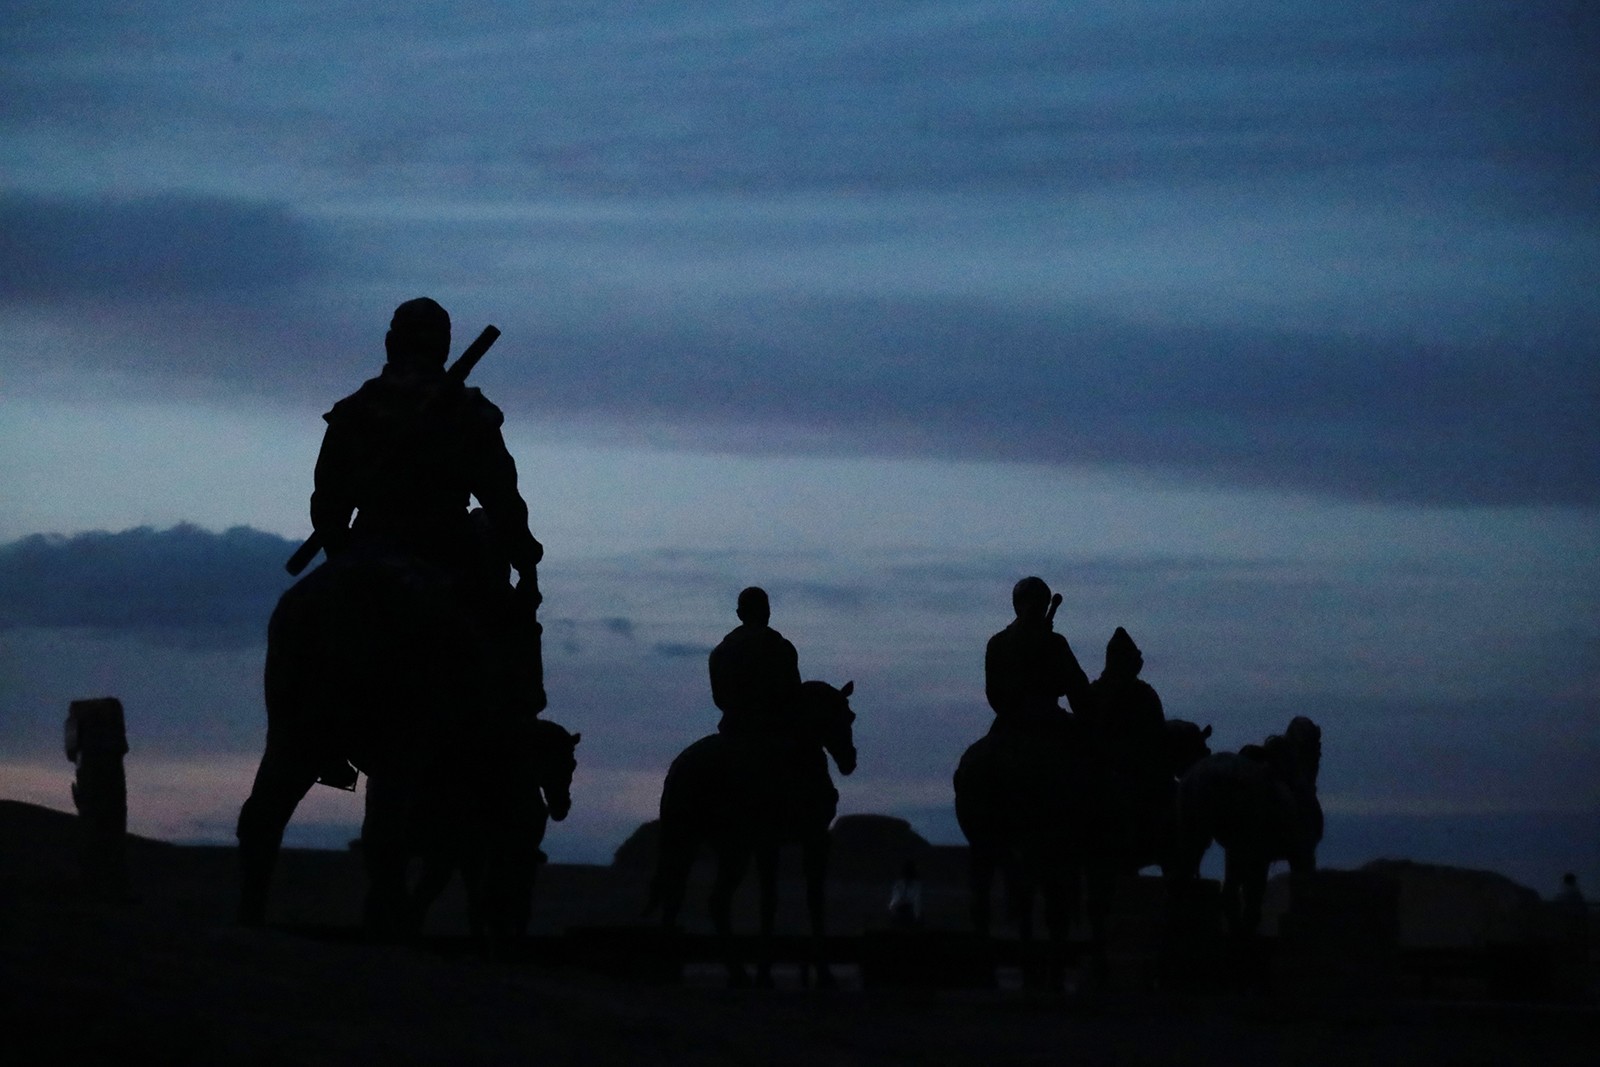 Statues of horse-riders appear lifelike in the evening at the 